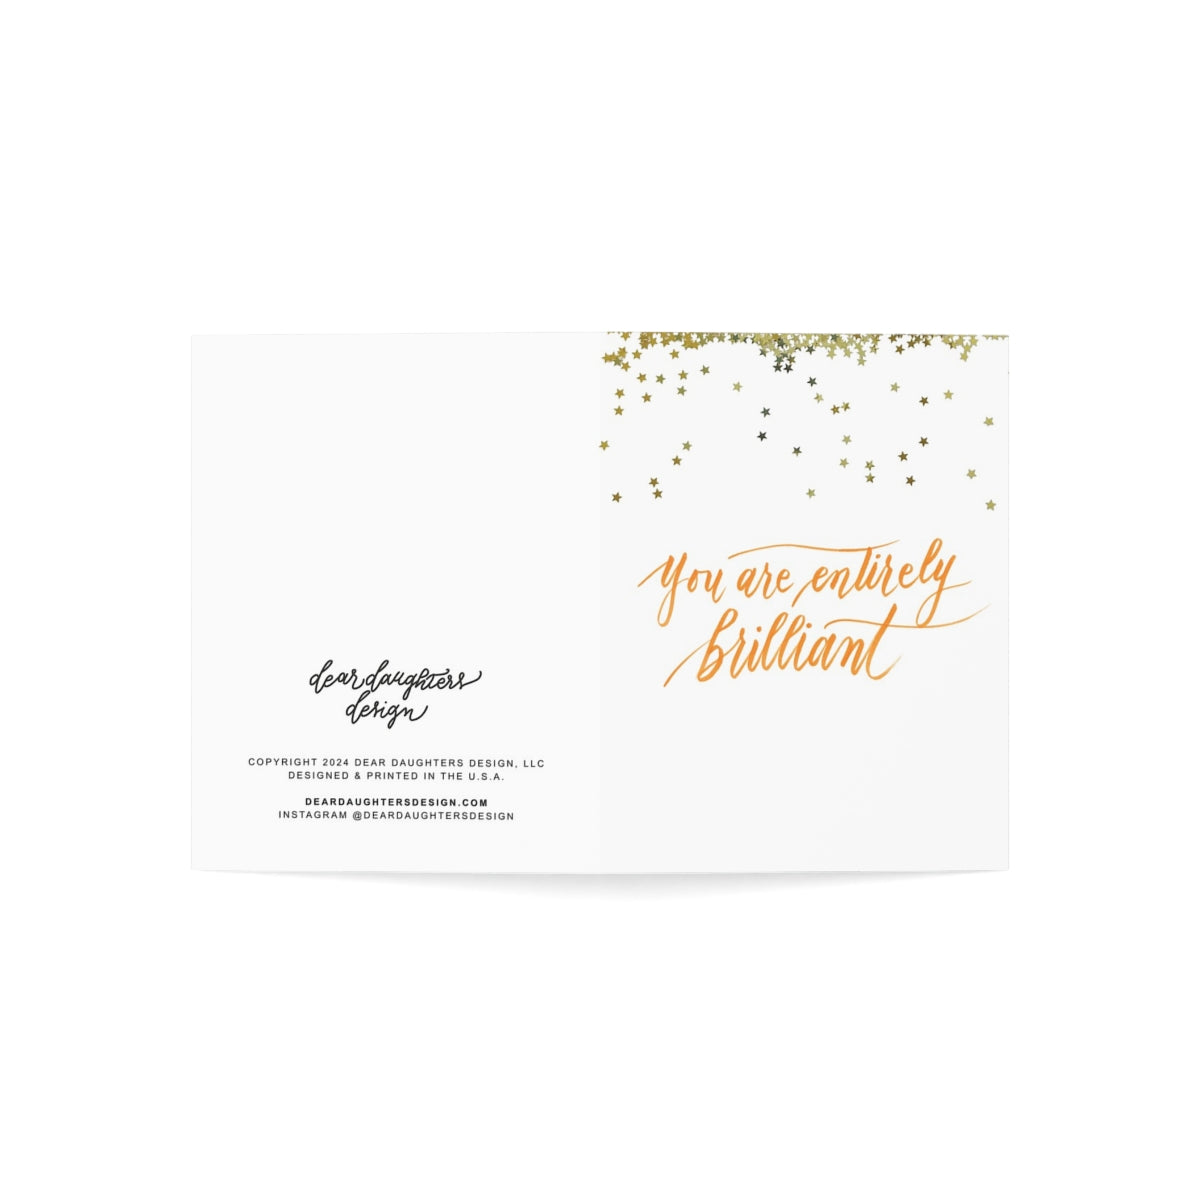 "You are entirely brilliant!" Orange Thank You Greeting Card - Gratitude #03